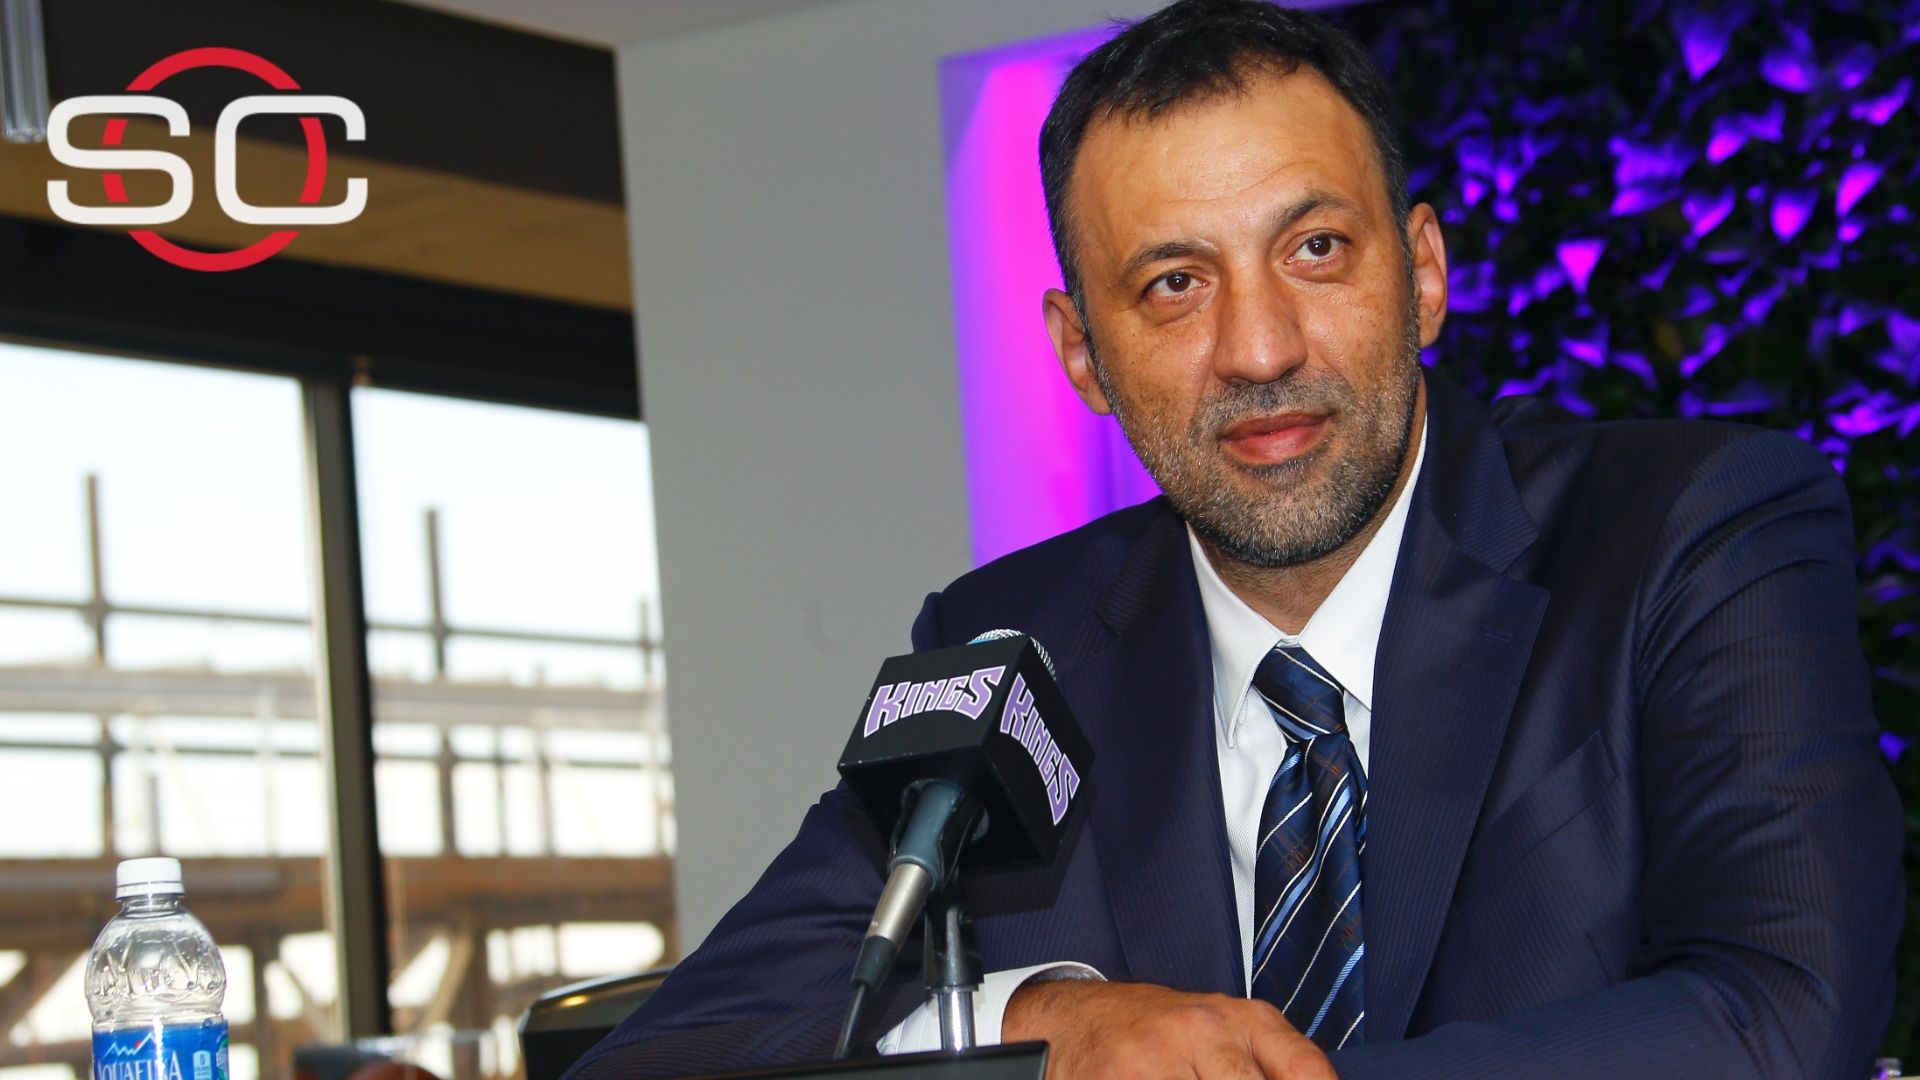 Vlade Divac steps down as Kings general manager